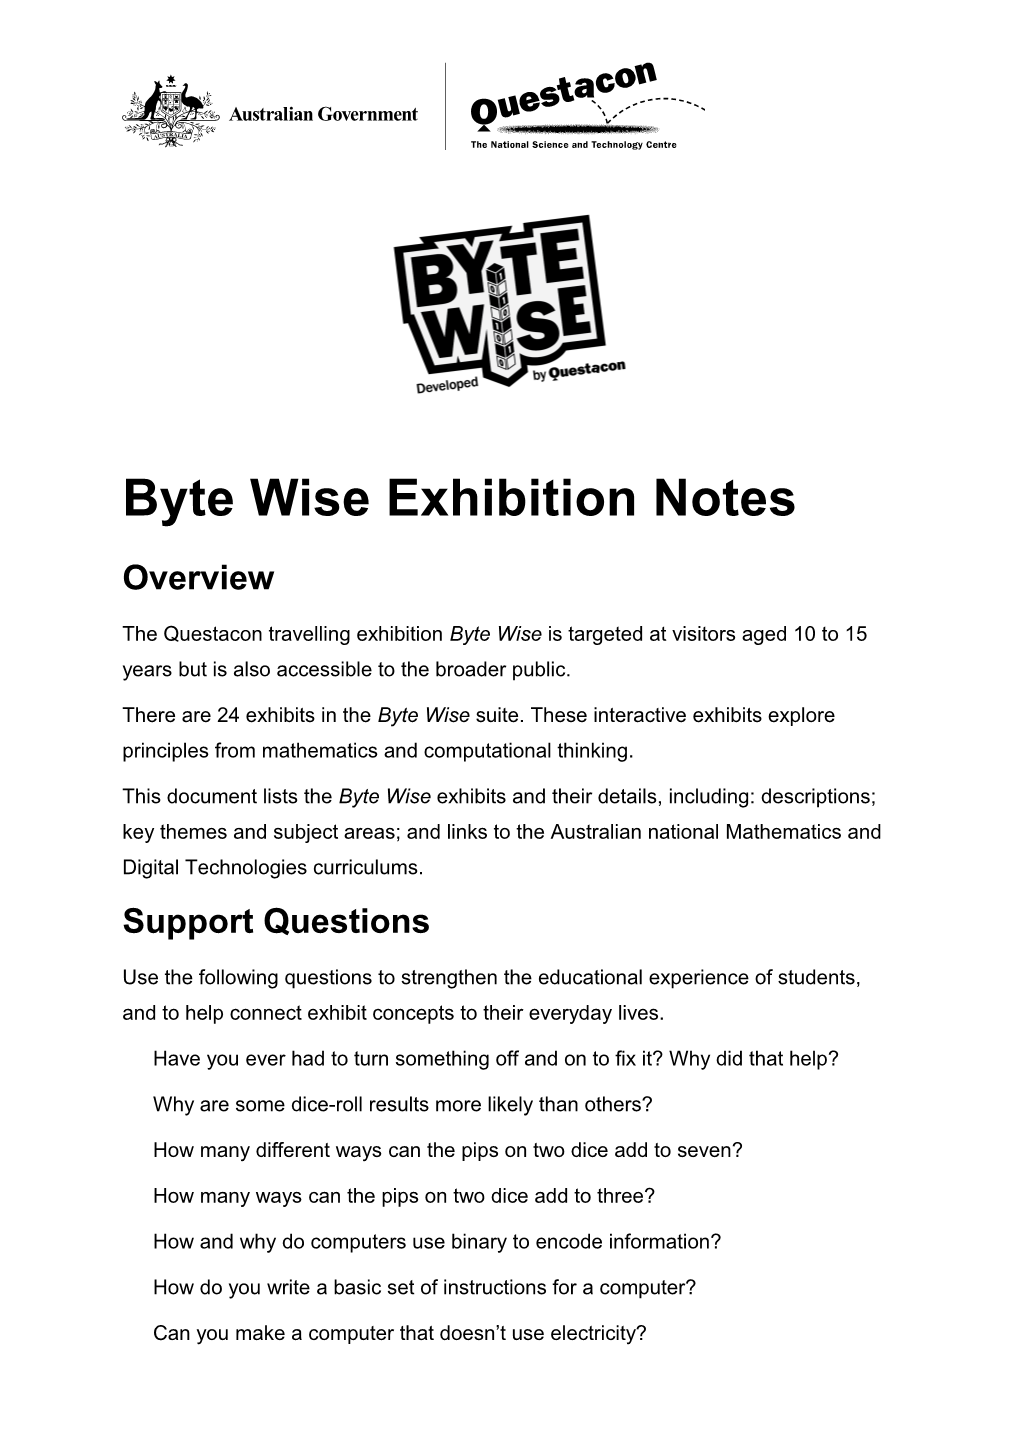 Bytewise Exhibition Notes